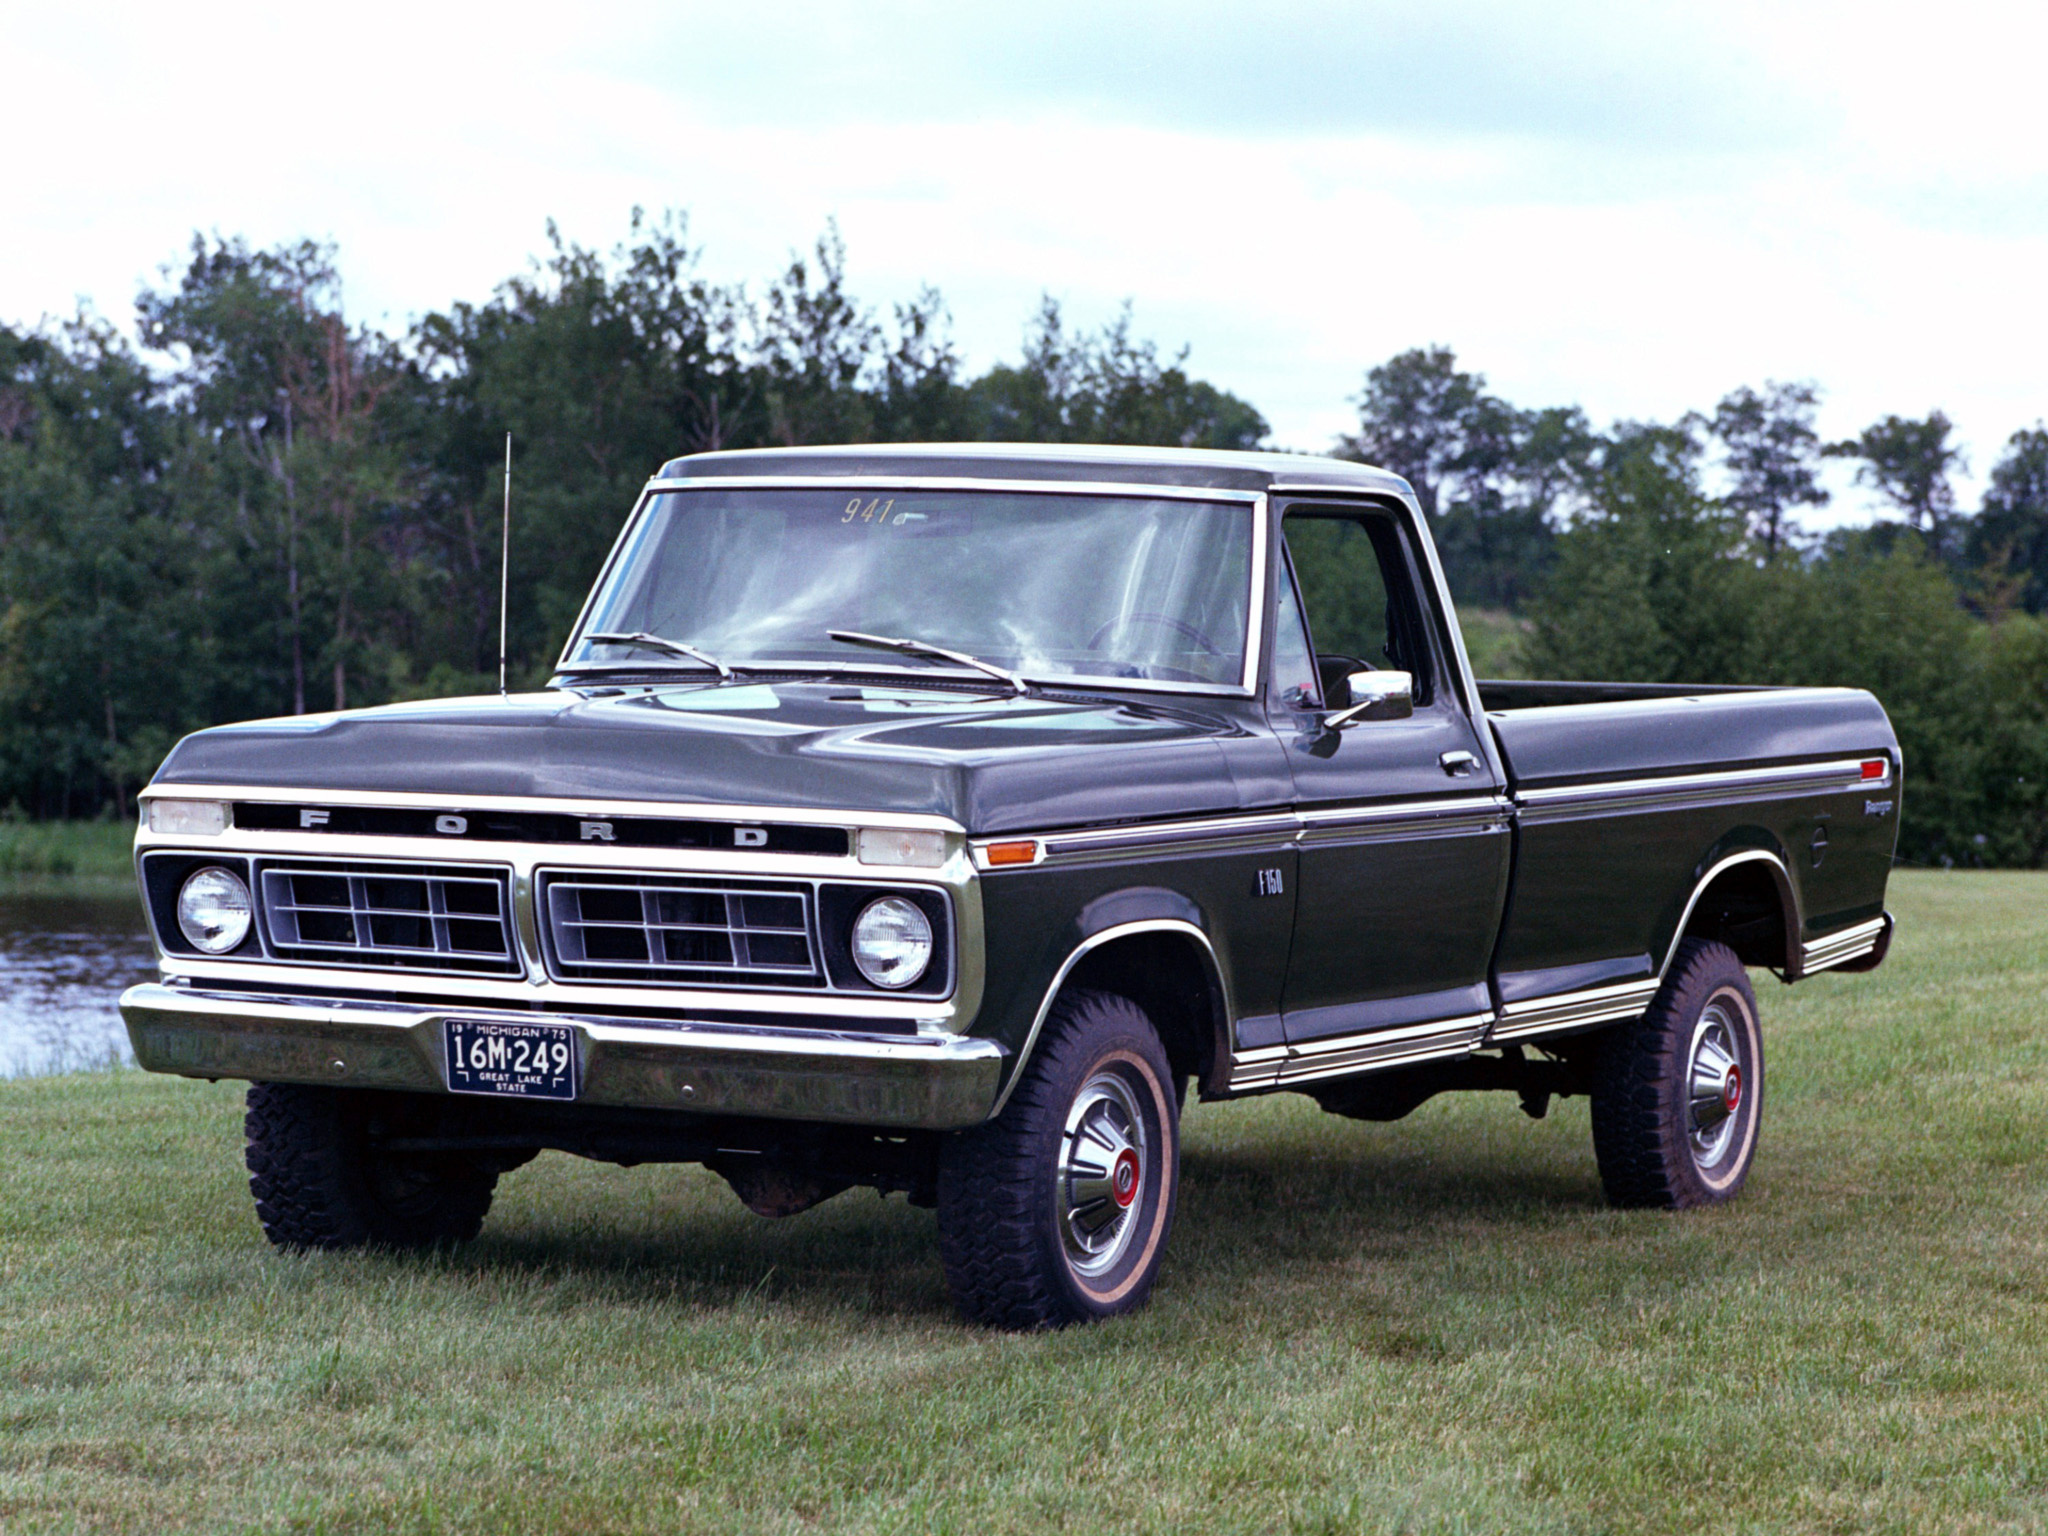 Ford Pickup: 1976 F-150 Ranger Sixth generation 4x4, Was introduced in 1973. 2050x1540 HD Wallpaper.